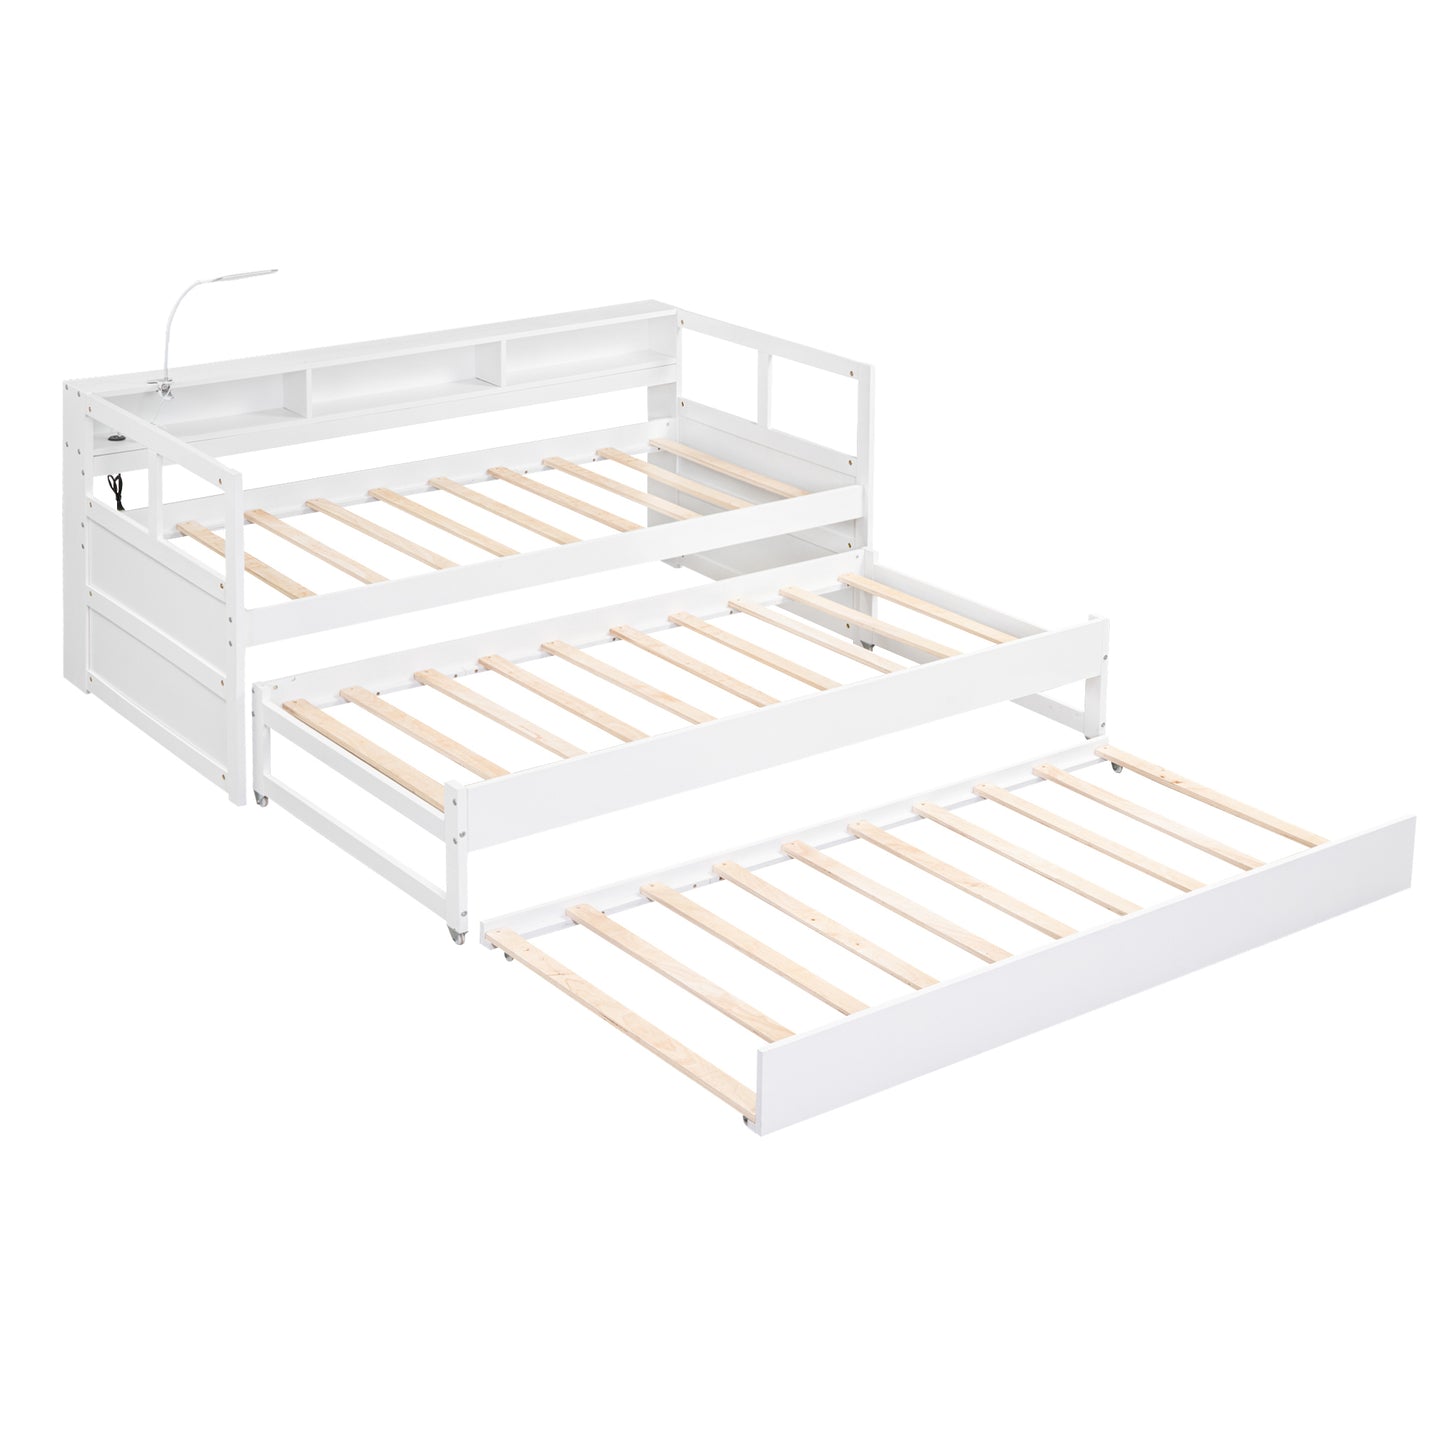 Twin XL Wood Daybed with 2 Trundles, 3 Storage Cubbies, 1 Light for Free and USB Charging Design, White